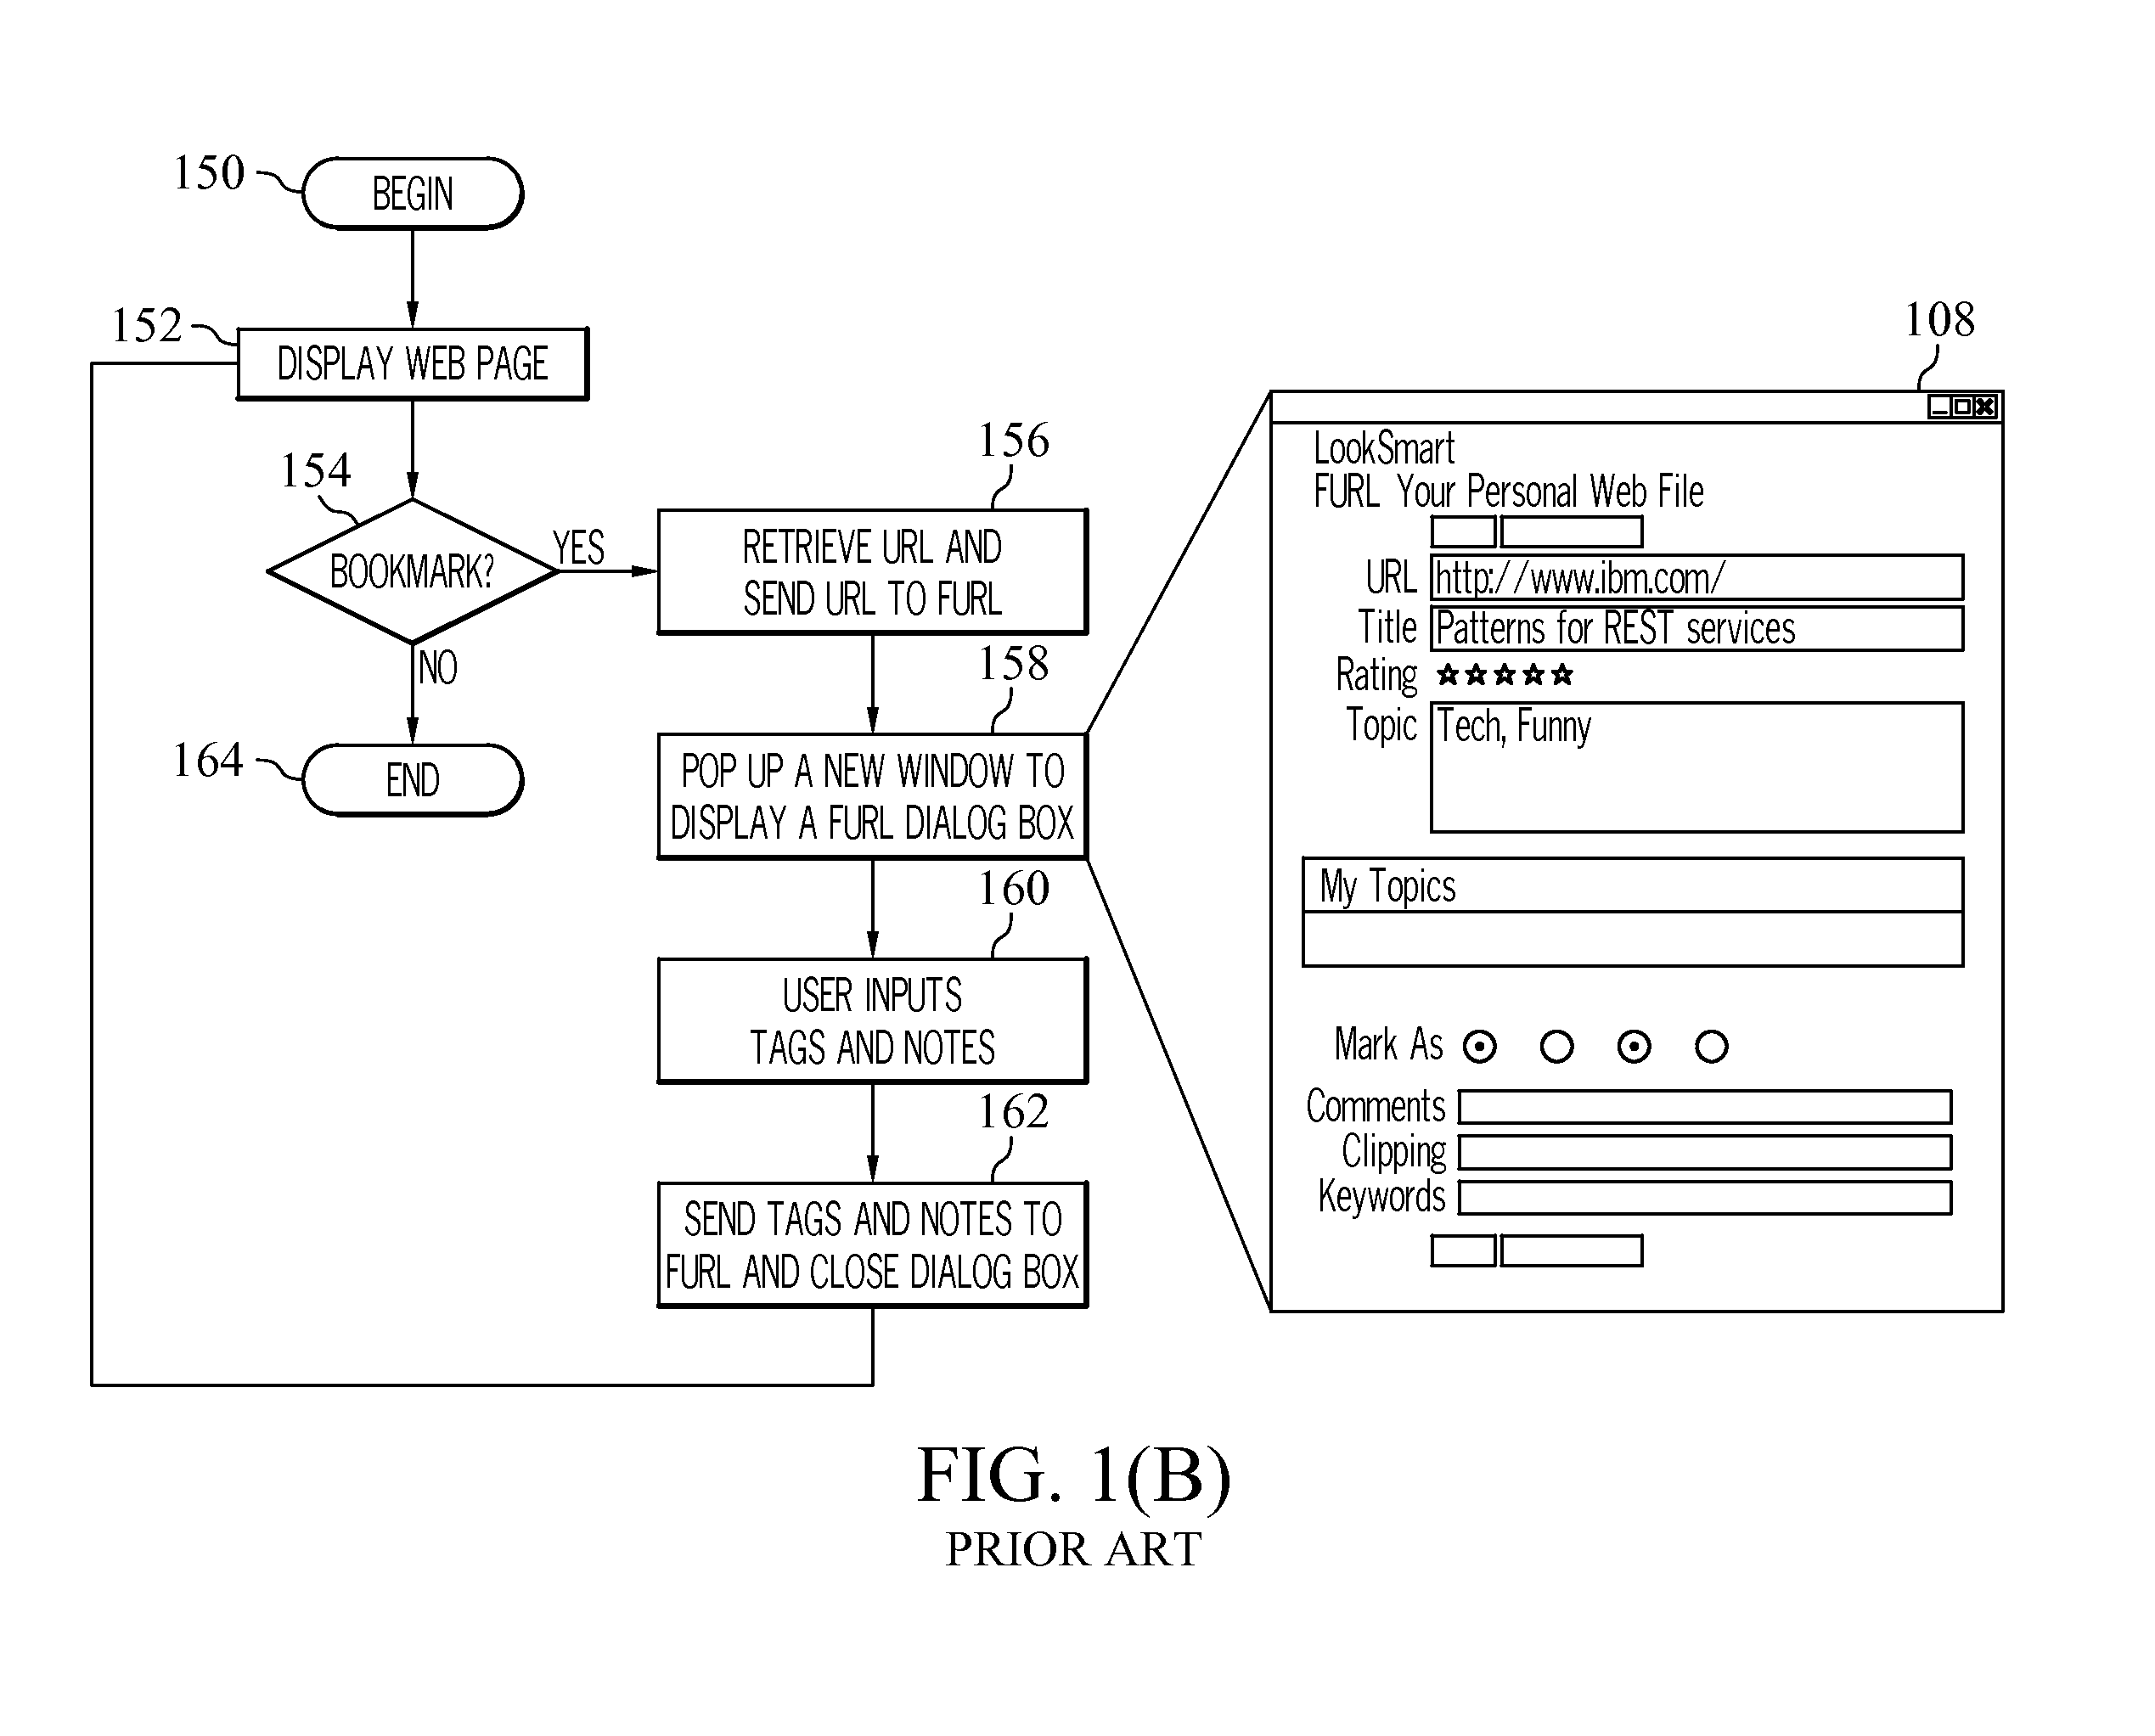 Method and system for providing suggested tags associated with a target web page for manipulation by a user